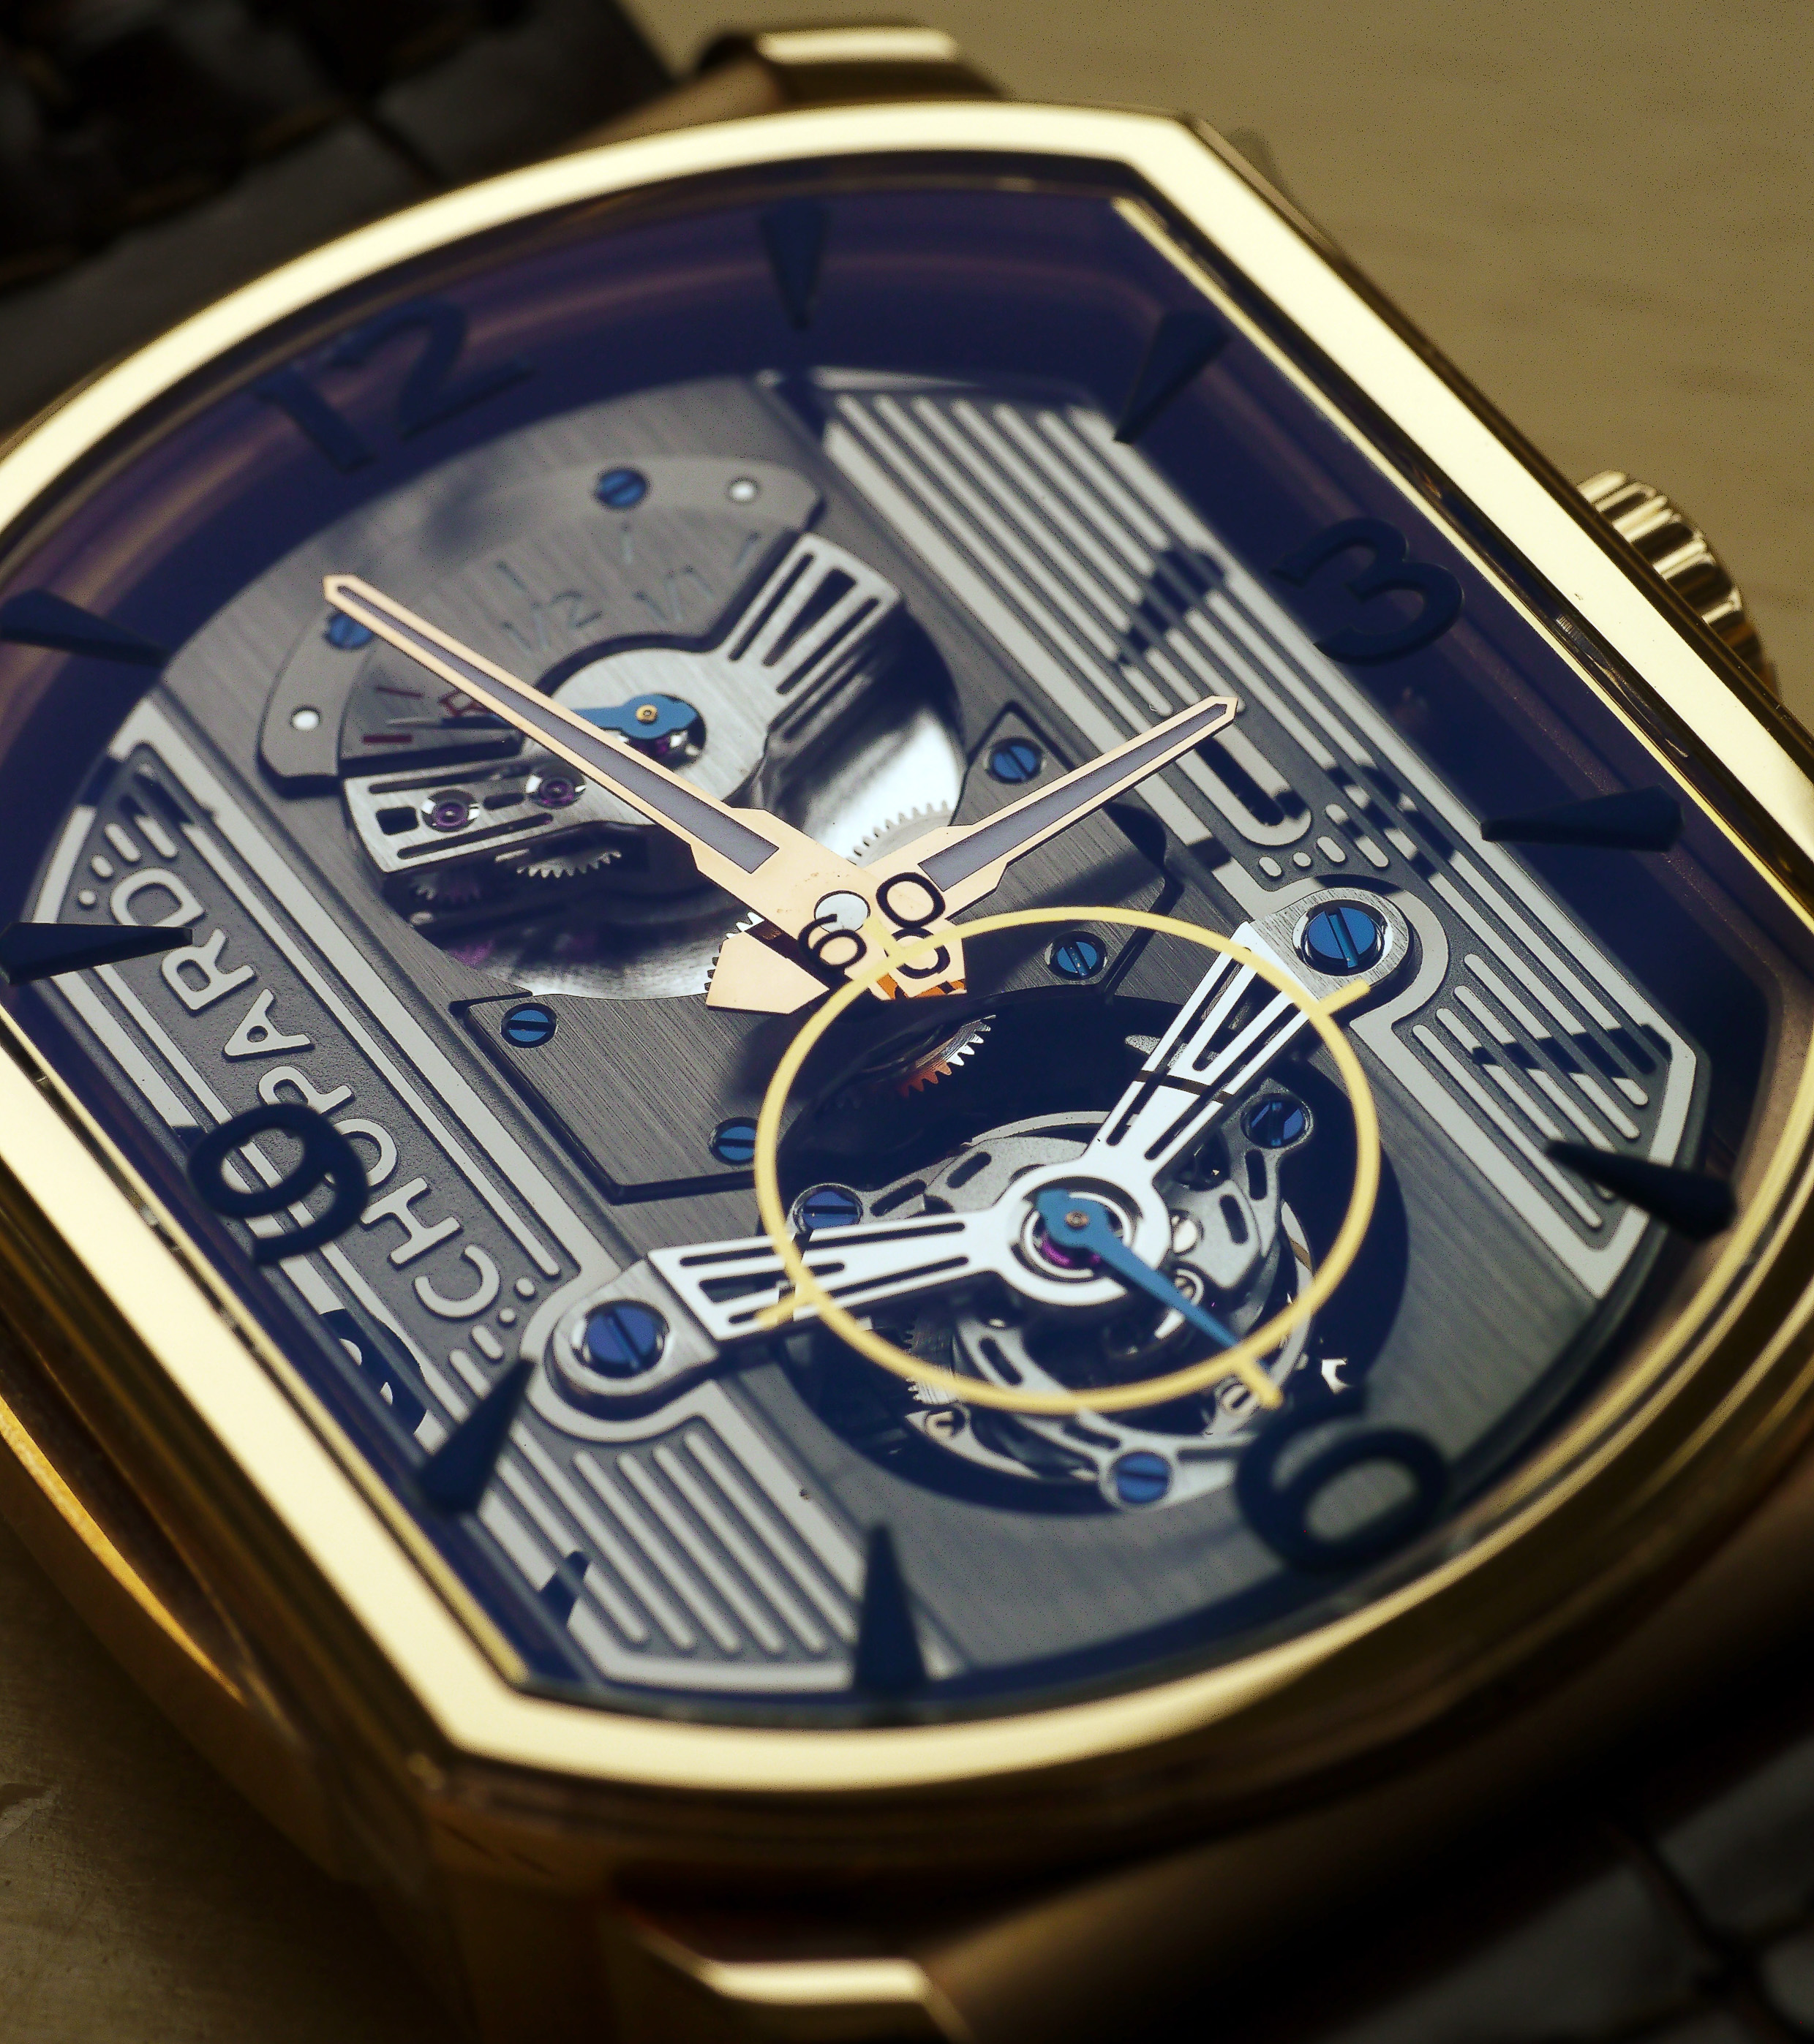 The L.U. Chopard Engine One Tourbillon. A rather technical-looking piece, admittedly. 